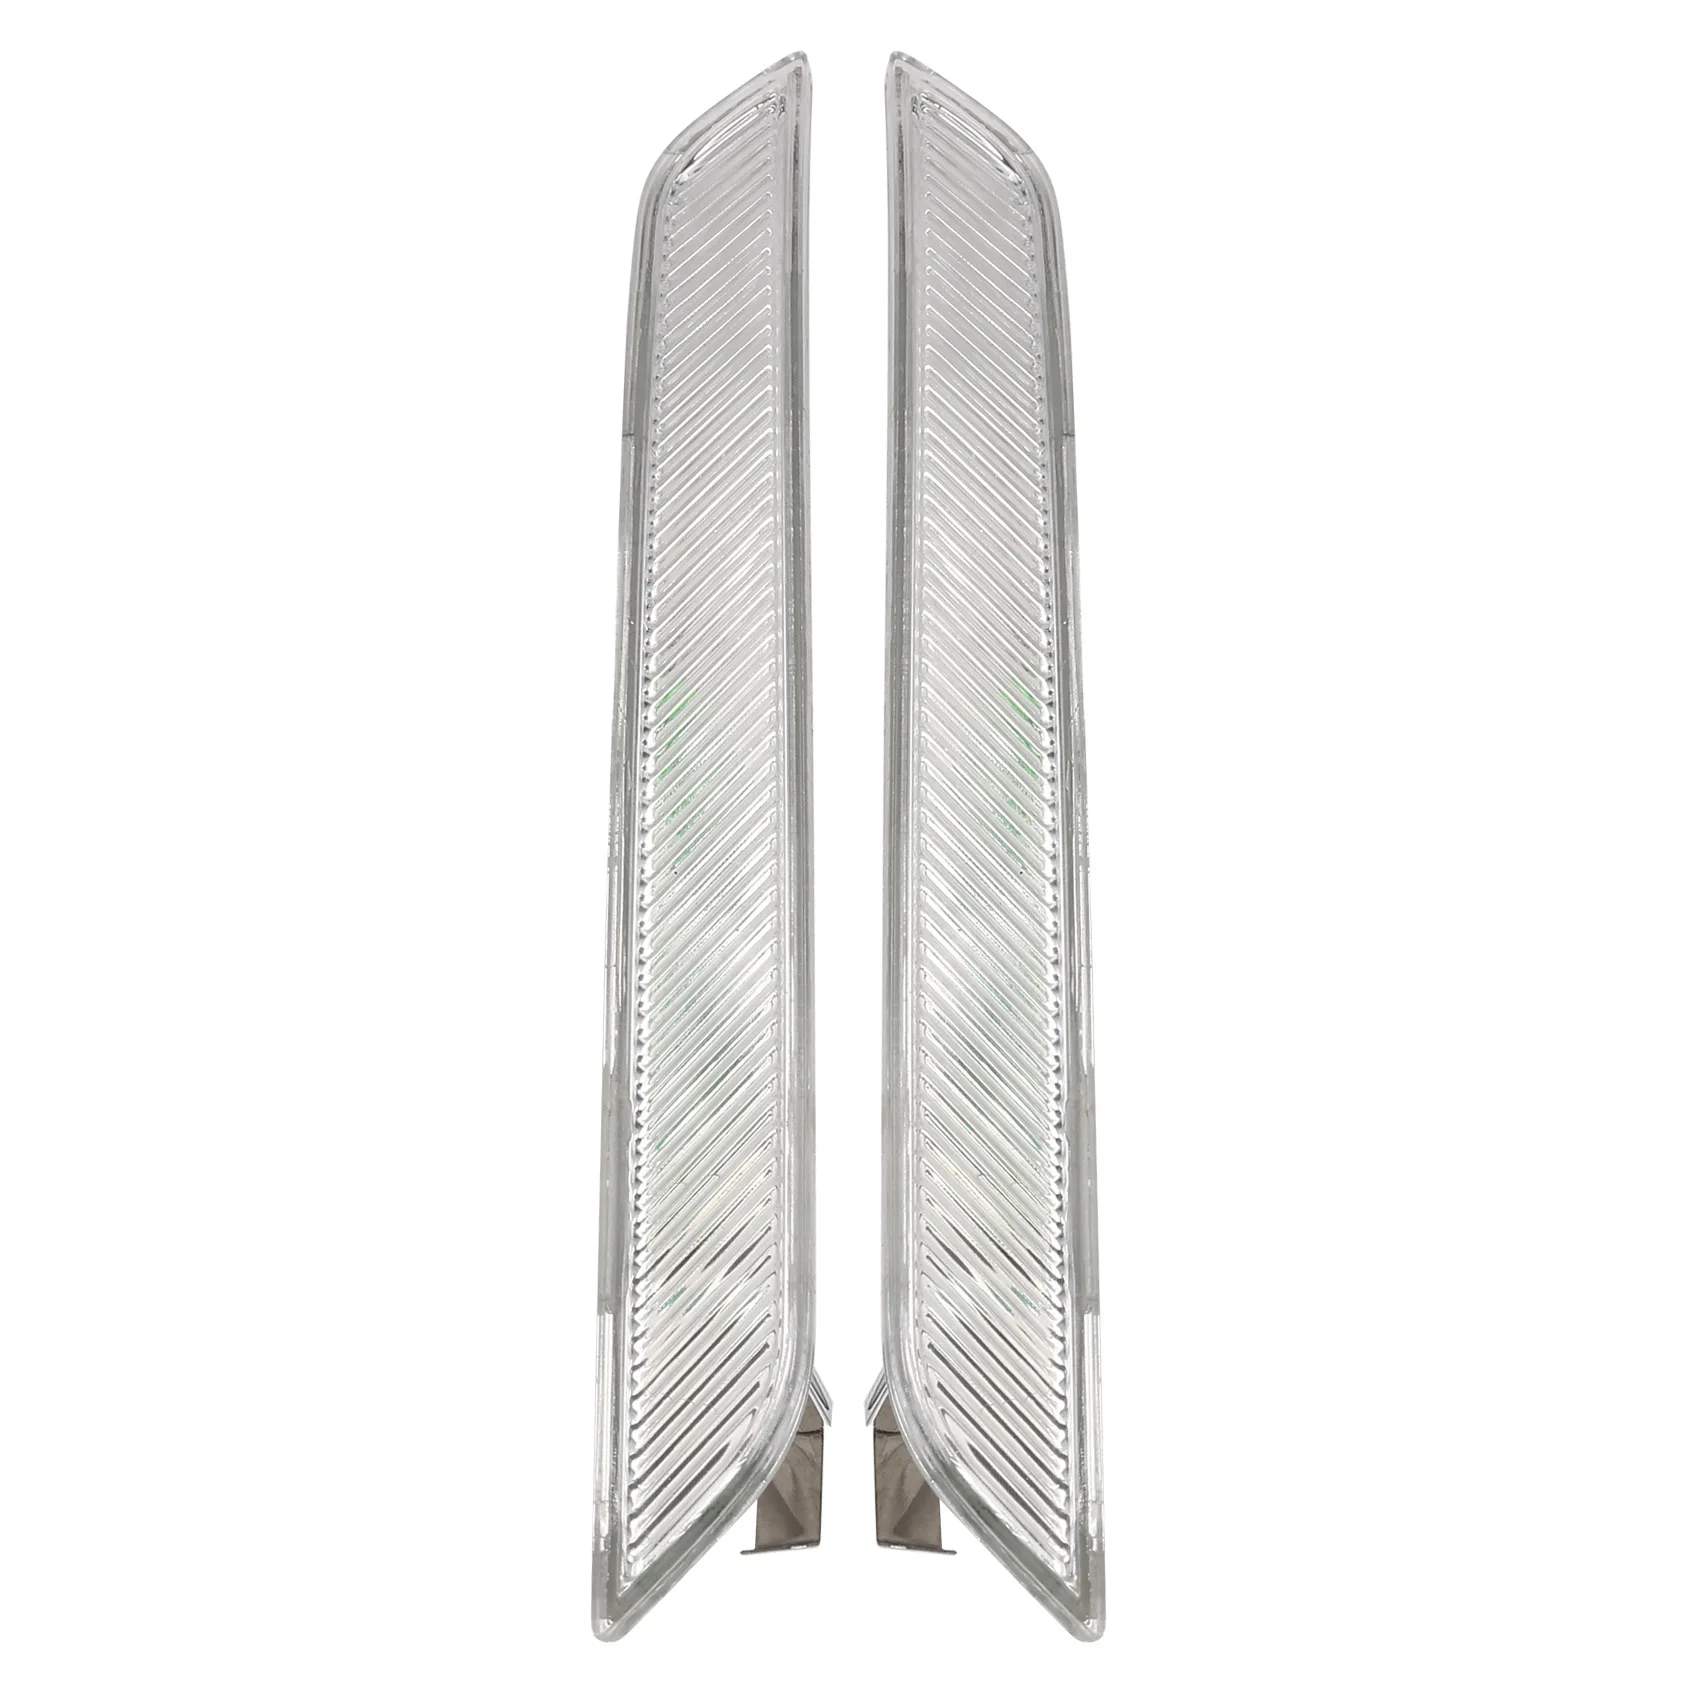 

2Pcs Euro Clear Lens Front Bumper Side Marker Reflector for E71 X6 E70 X5M 2008-2014 Replace Sidemarker